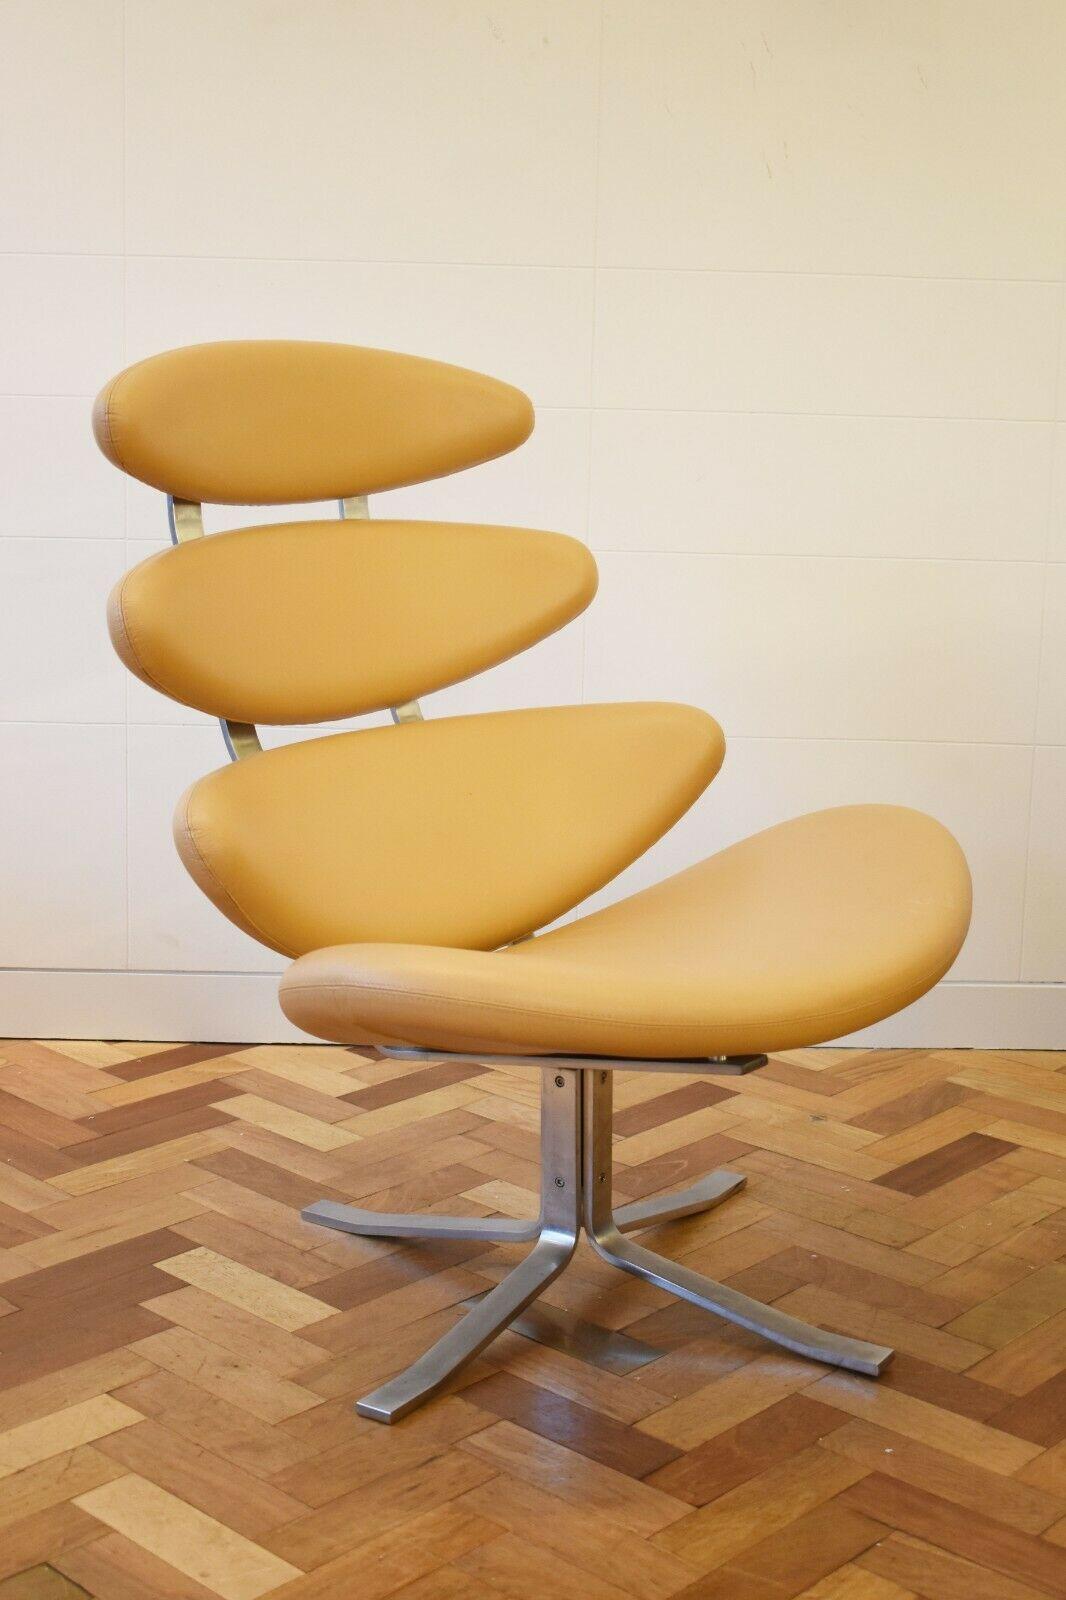 Late 20th Century Corona Chair designed by Poul Volther for Erik Jorgensen 1990s